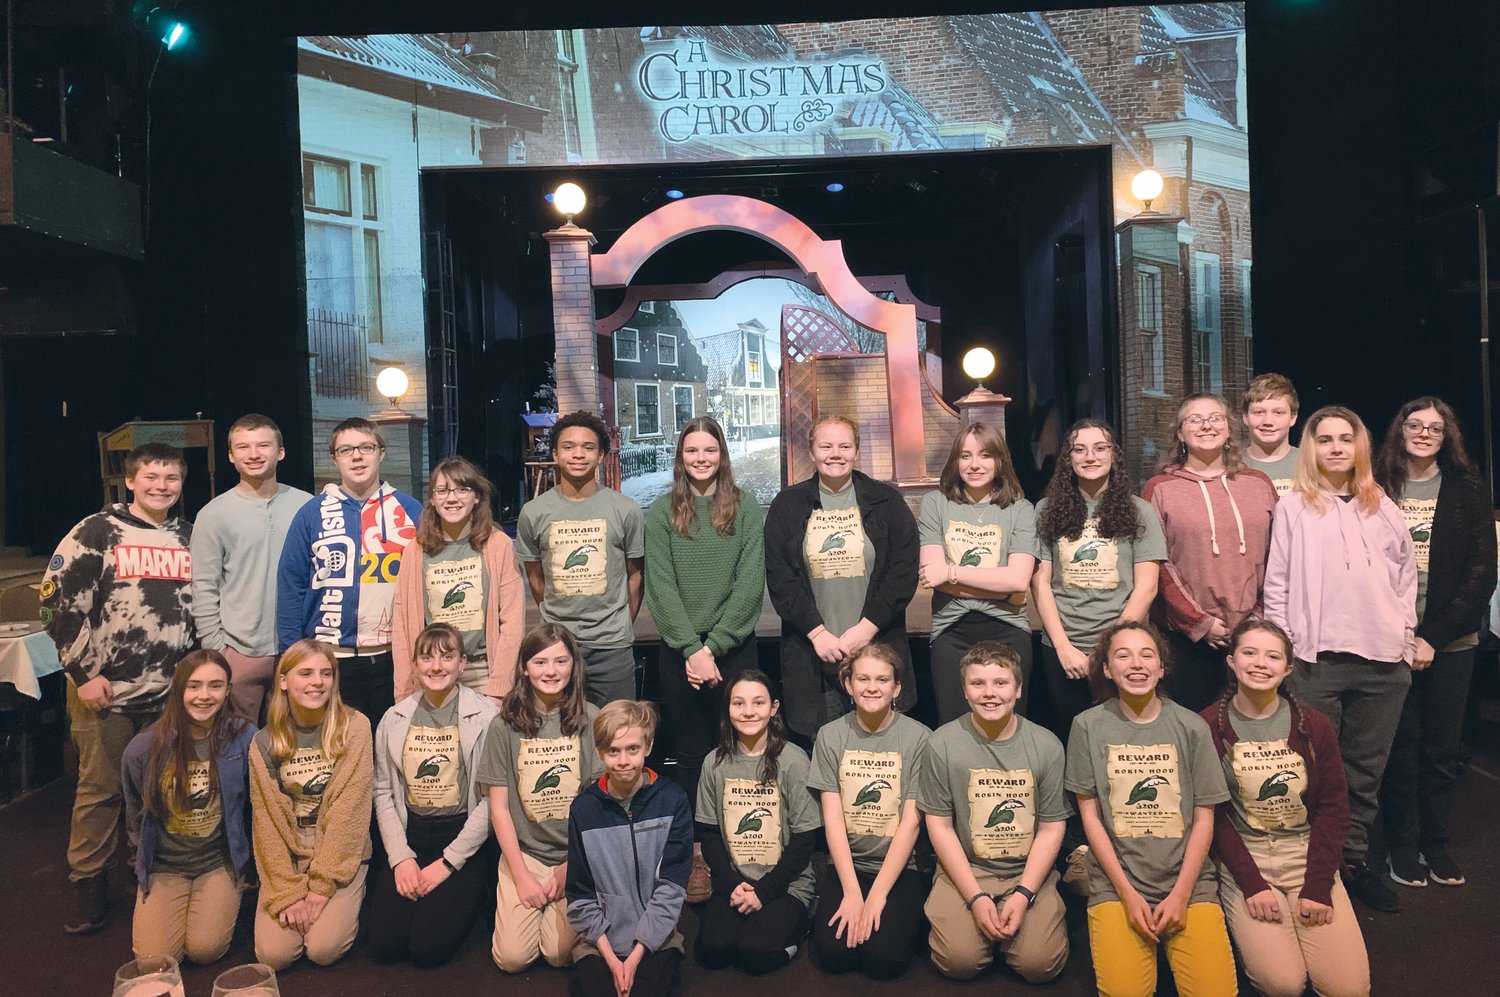 Members of the Parke Heritage Middle School drama club attended the play, “A Christmas Carol,” at Beef and Boards Dinner Theater recently. The group was able to eat lunch and then watch the performance. The field trip was a way for the drama members to experience a professional drama production. Those attending were front row, Isabella Bundy, Laney Crowder, Ella Lacy, Carson Davis, Gavin Godfrey, Rheese Benjamin, Bryleigh Lamb, Matthew Fox, Mackenzie Gillogly and Marlee Jeffers; middle row, Jaden Marietta, Max Swaim, Lucas Hutchens, Haley Holtsclaw, Cian Todd, Ashlyn Gillogly, Alexis McAmis, Maddison Fisher, Samantha Mikus, Abigail Julbert and Kali Burgess; and back row, Stephen Jessee and Mia Bowles.